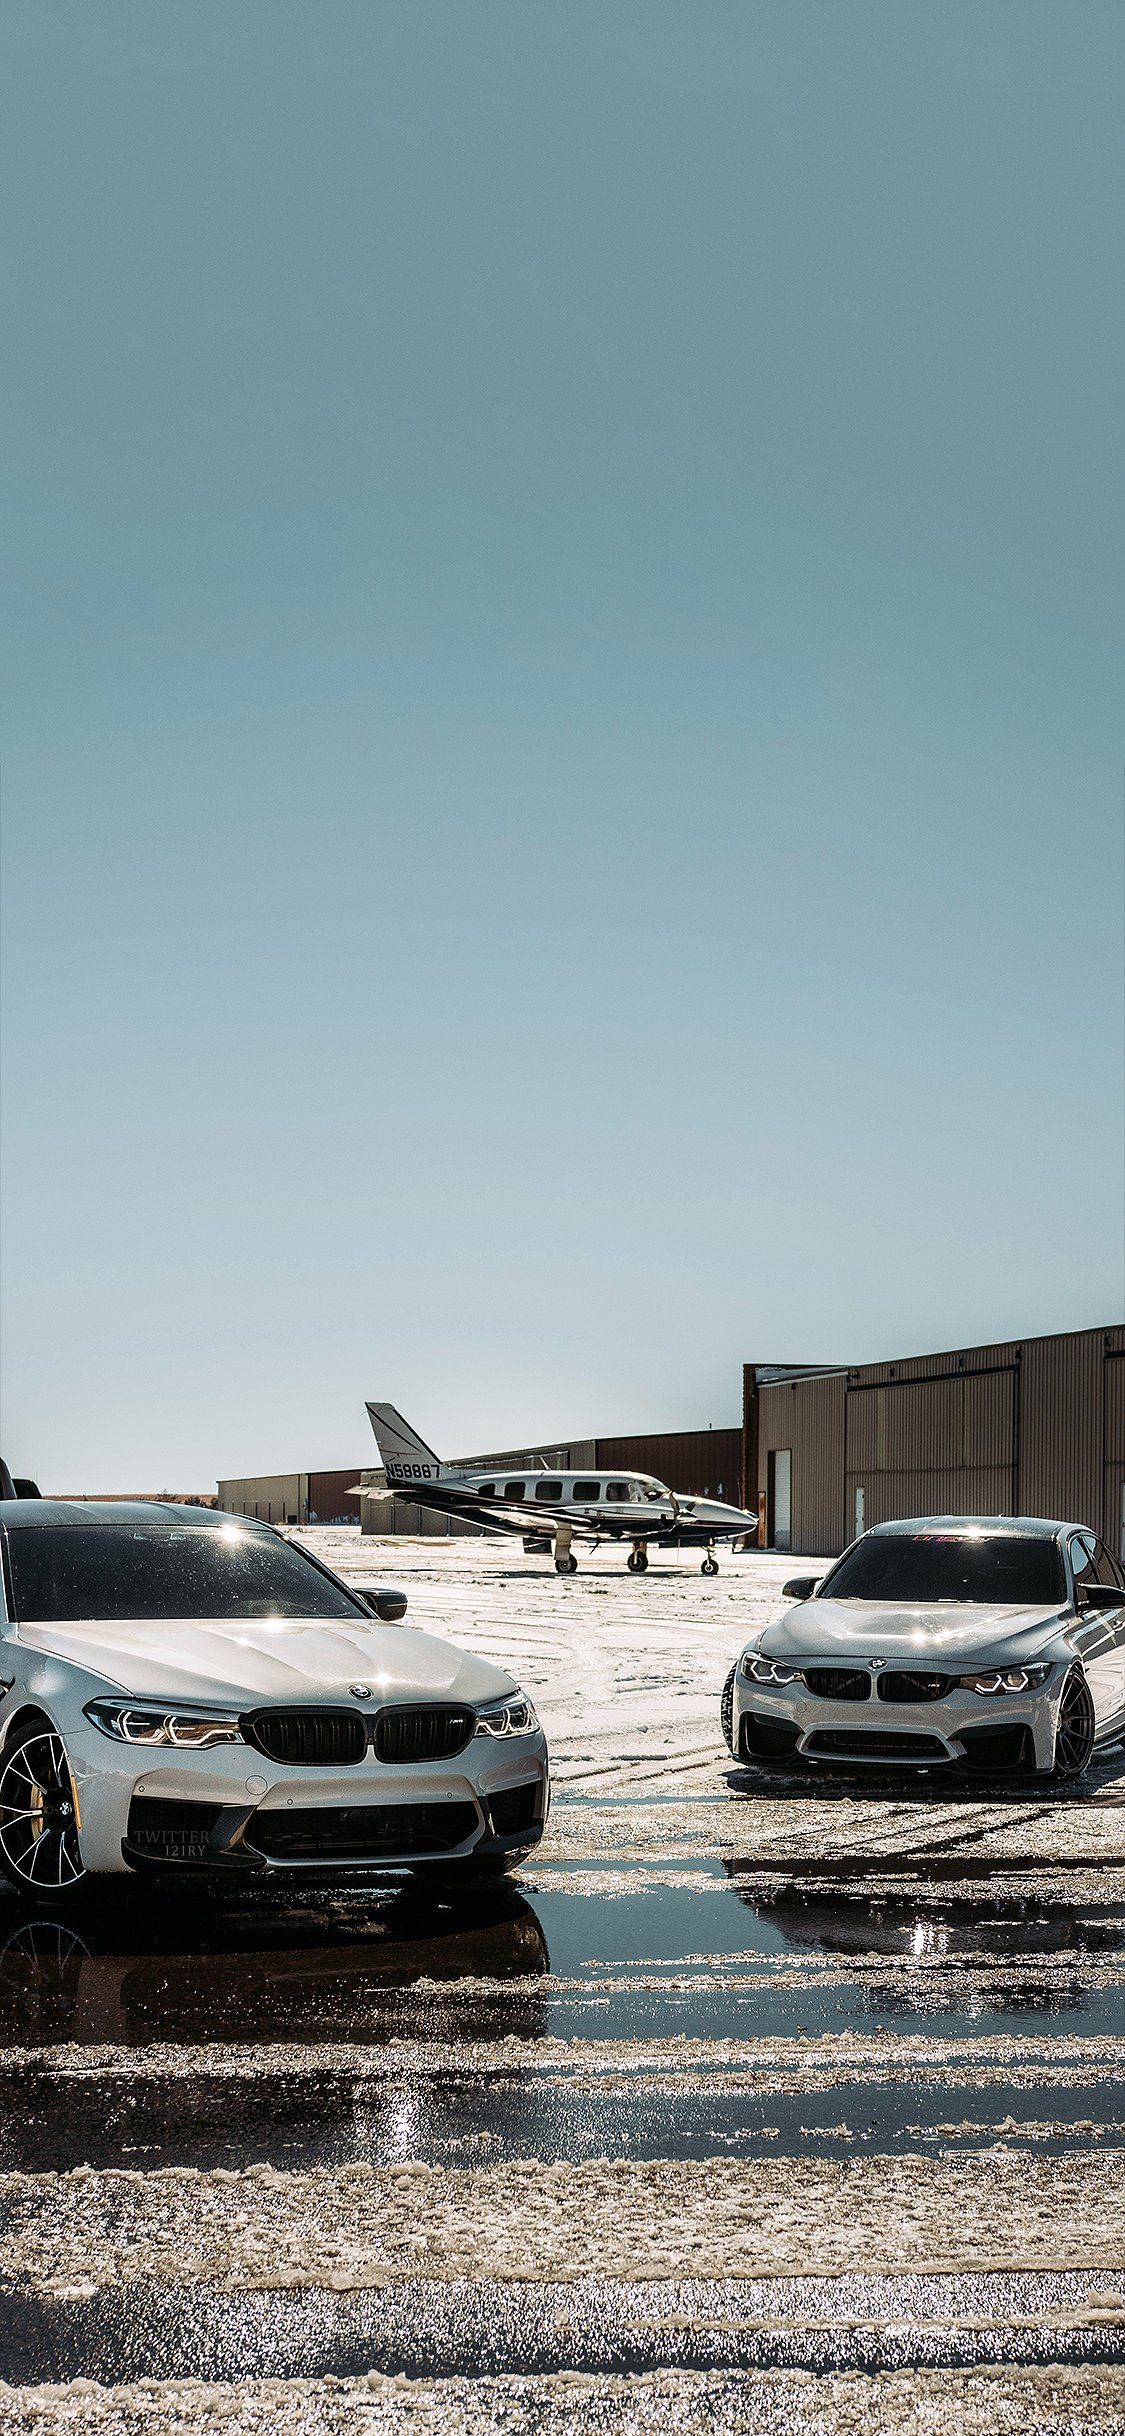 A couple of cars parked next to each other - BMW, cars